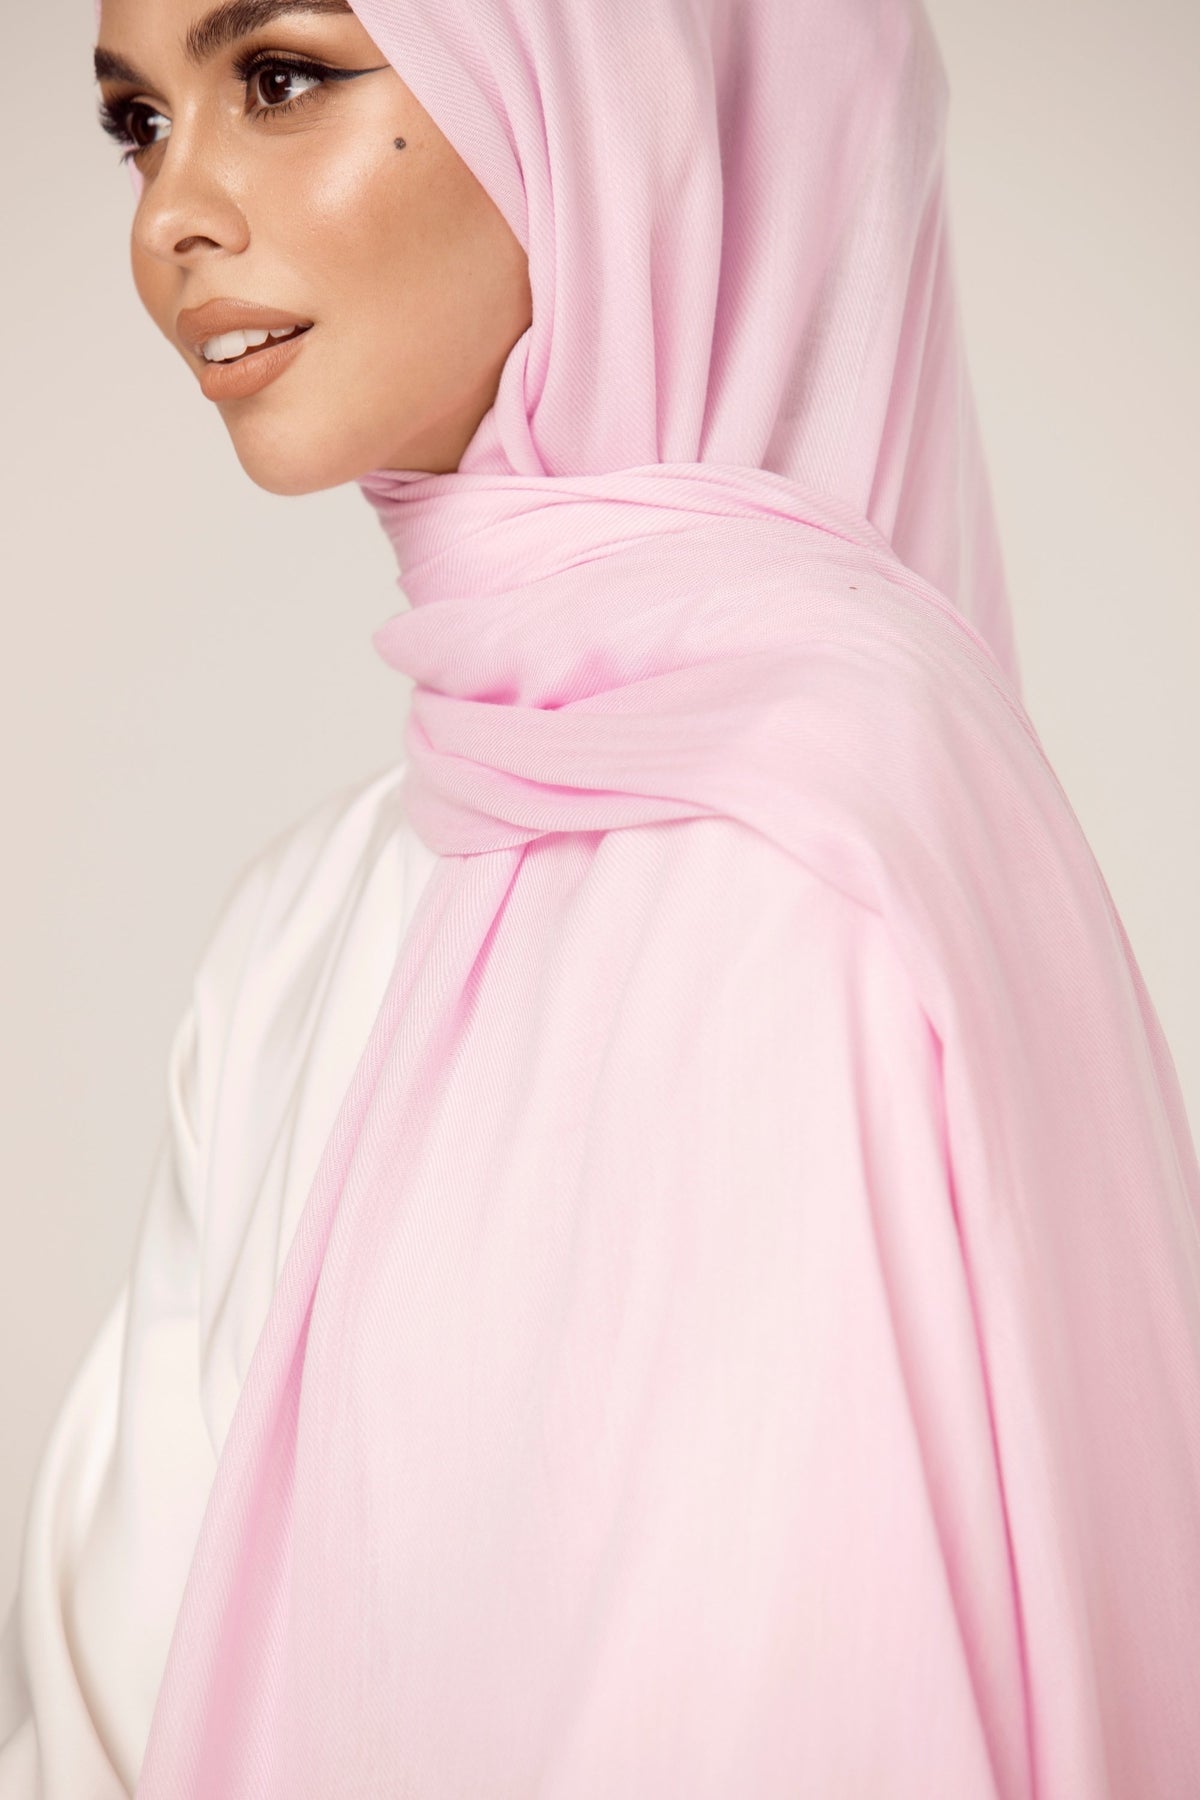 Premium Woven ECOVERO™ Hijab - Orchid Pink epschoolboard 